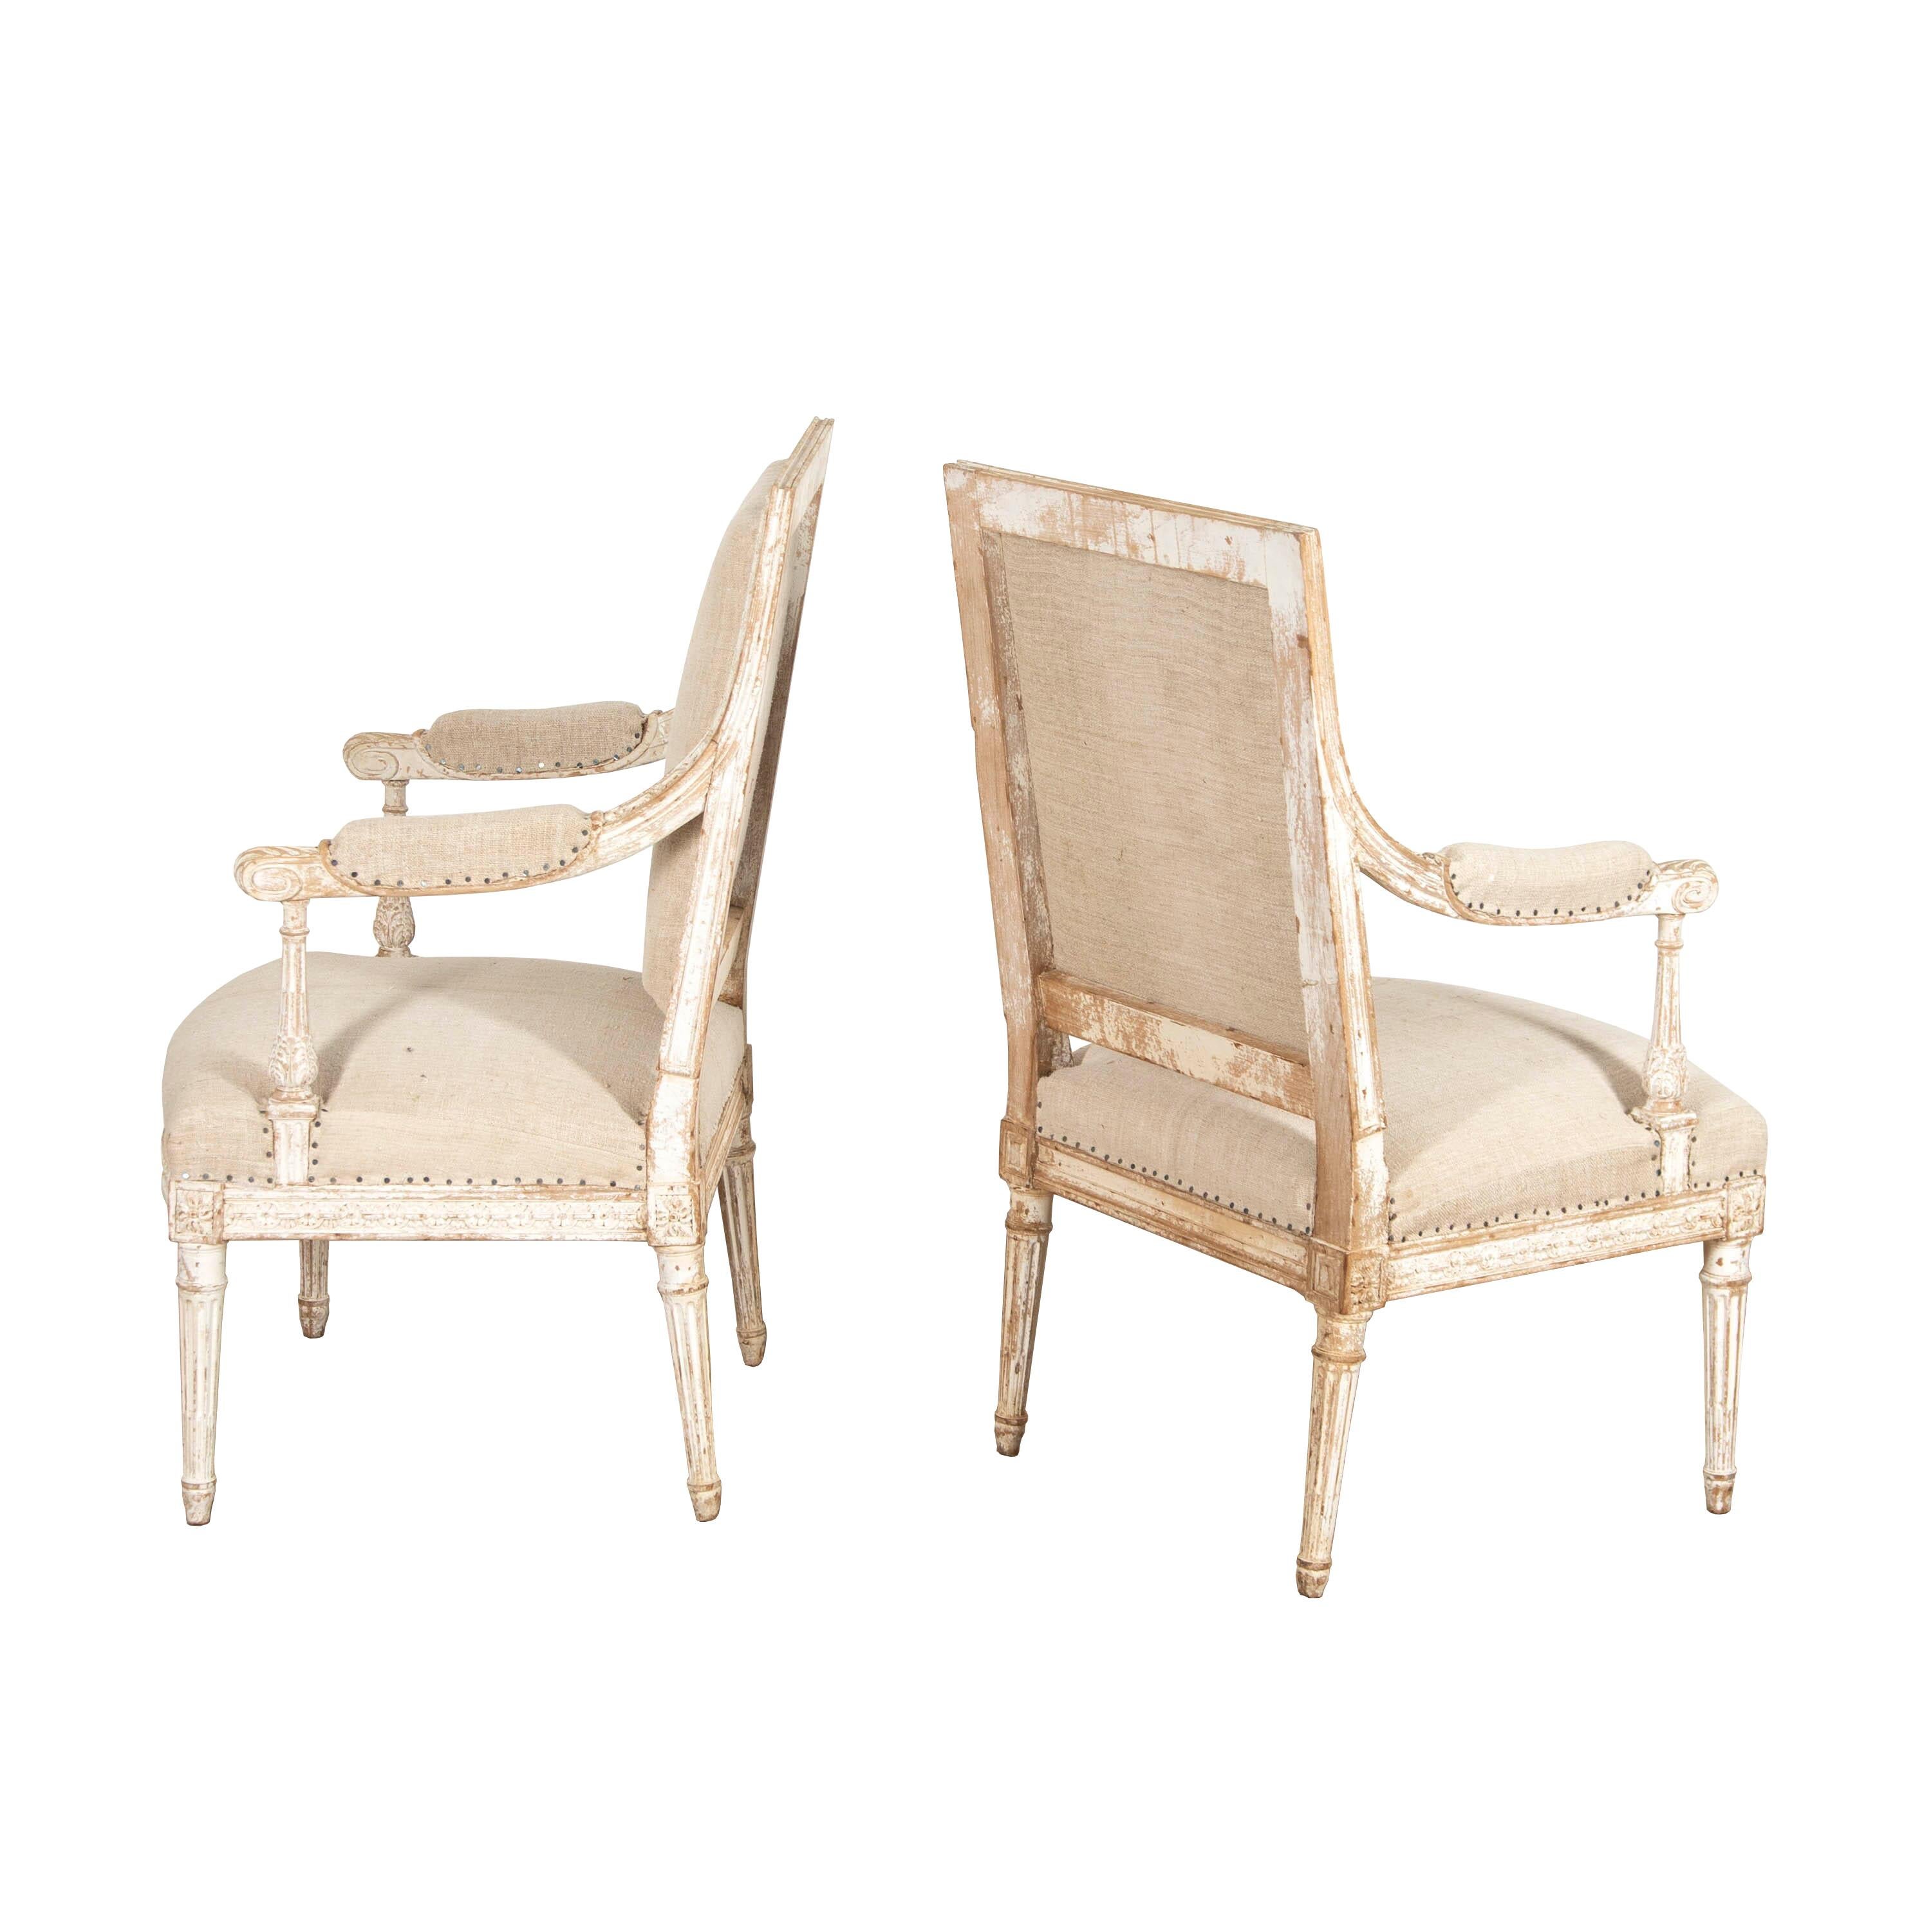 Elegant pair of Louis XVI armchairs.
Featuring superb, refined carving throughout with traces of original paintwork. Both chairs have been beautifully crafted from wood, with comfortable seats and a strong structure. 
Raised on tapered, round legs